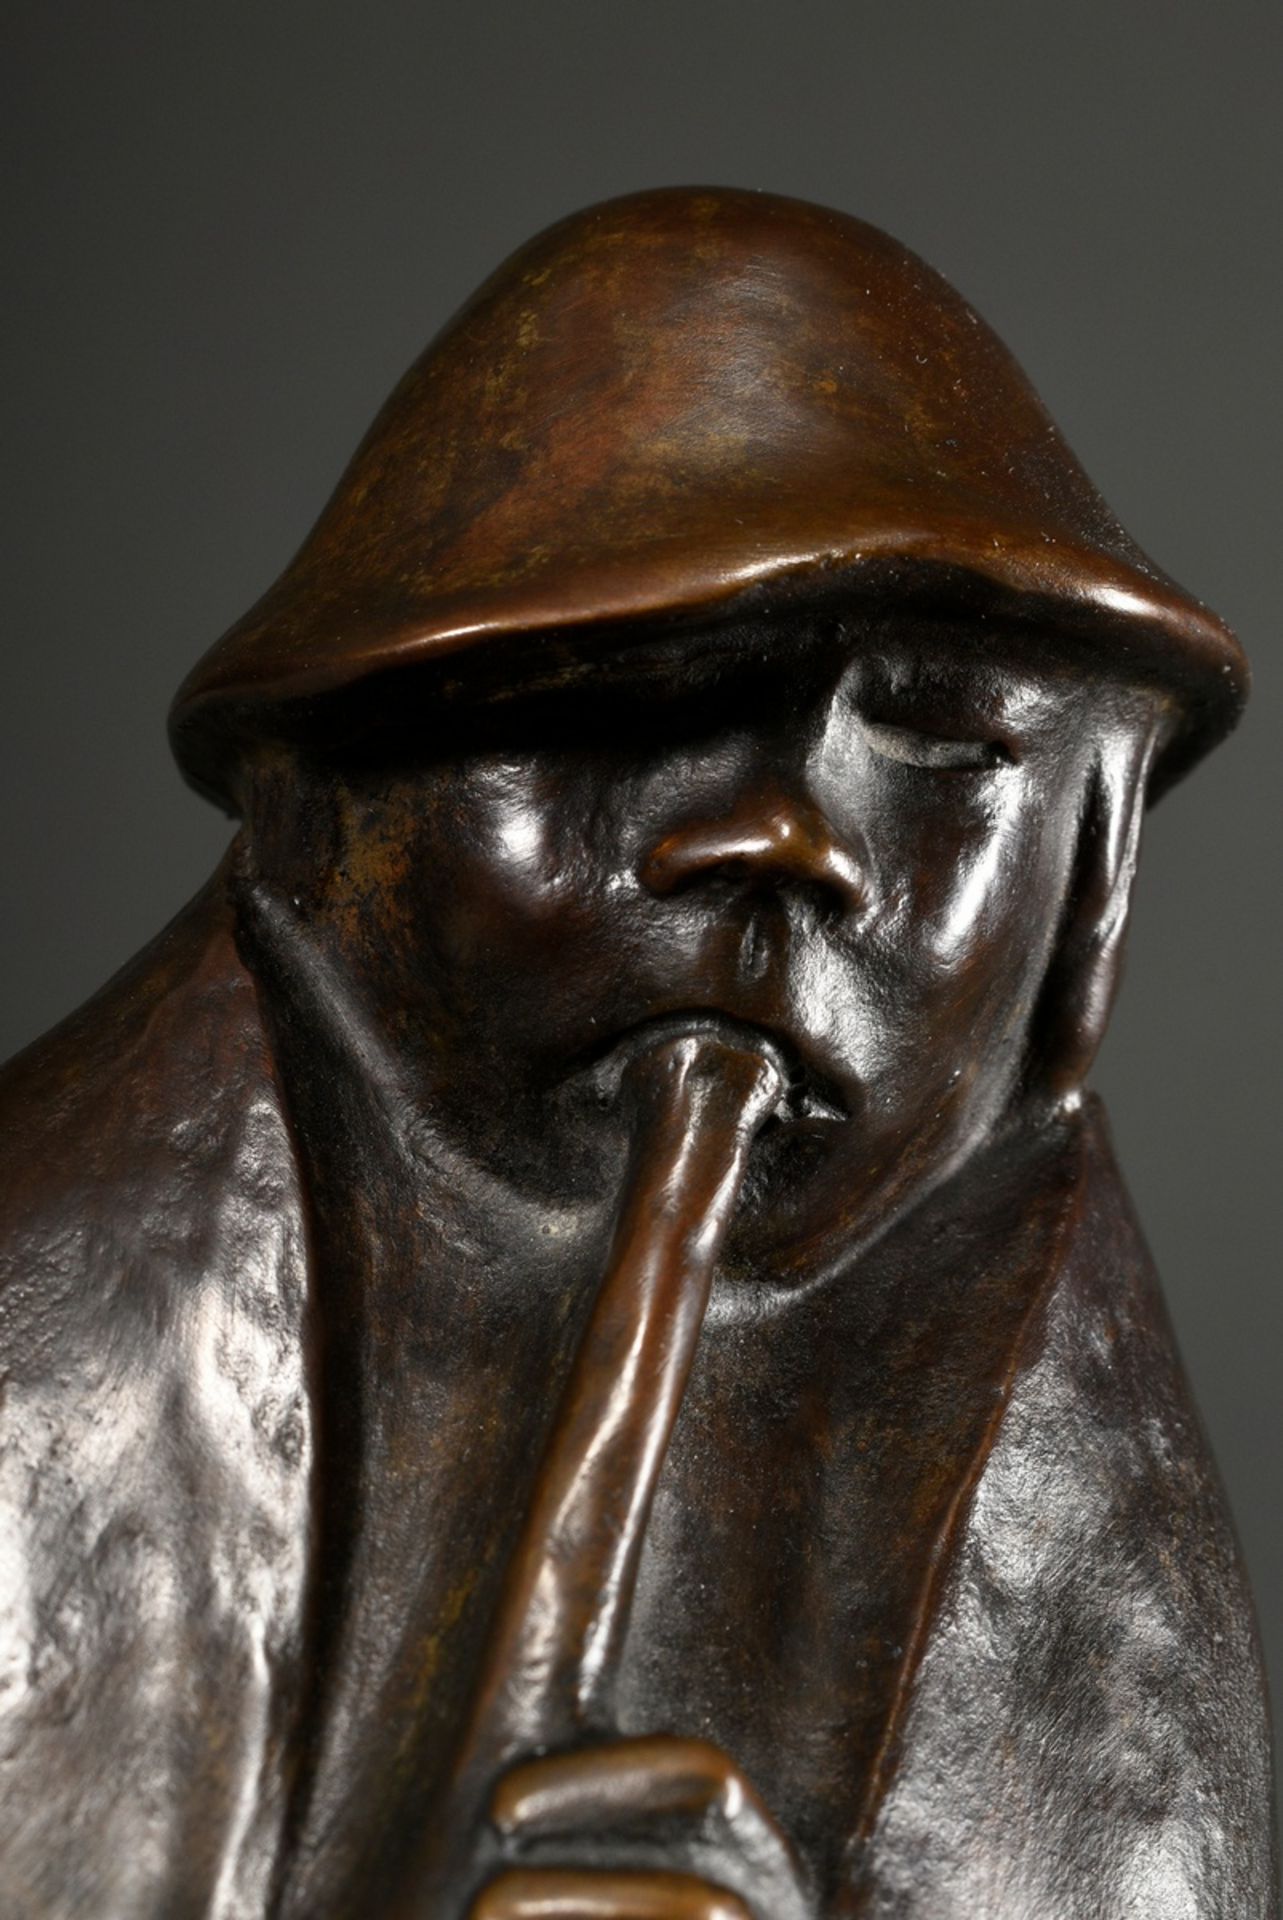 Barlach, Ernst (1870-1938) "The Flute Player" 1936, patinated bronze, 119/980, b. sign/num., posthu - Image 4 of 6